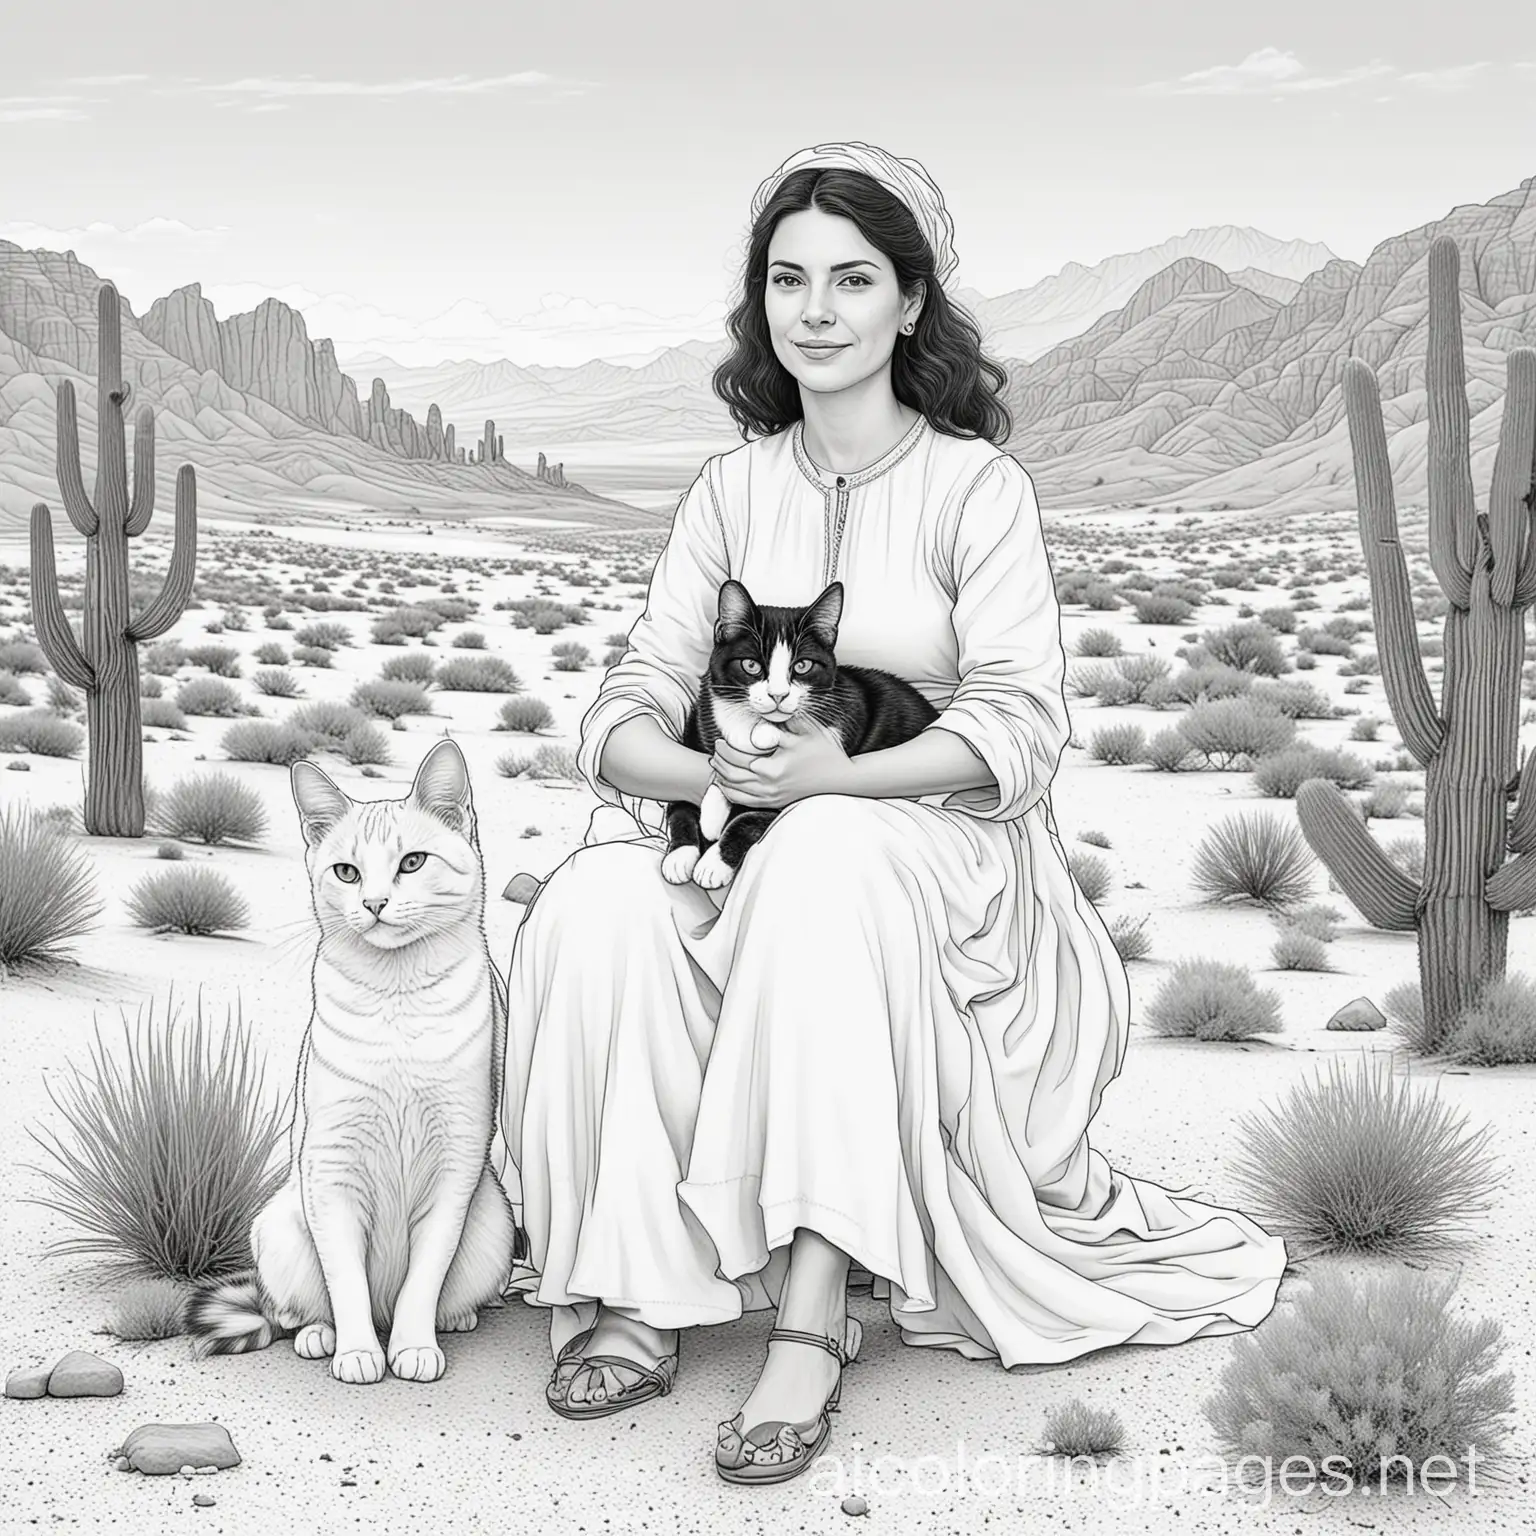 Aunt Sara with her two cats in the desert, Coloring Page, black and white, line art, white background, Simplicity, Ample White Space. The background of the coloring page is plain white to make it easy for young children to color within the lines. The outlines of all the subjects are easy to distinguish, making it simple for kids to color without too much difficulty